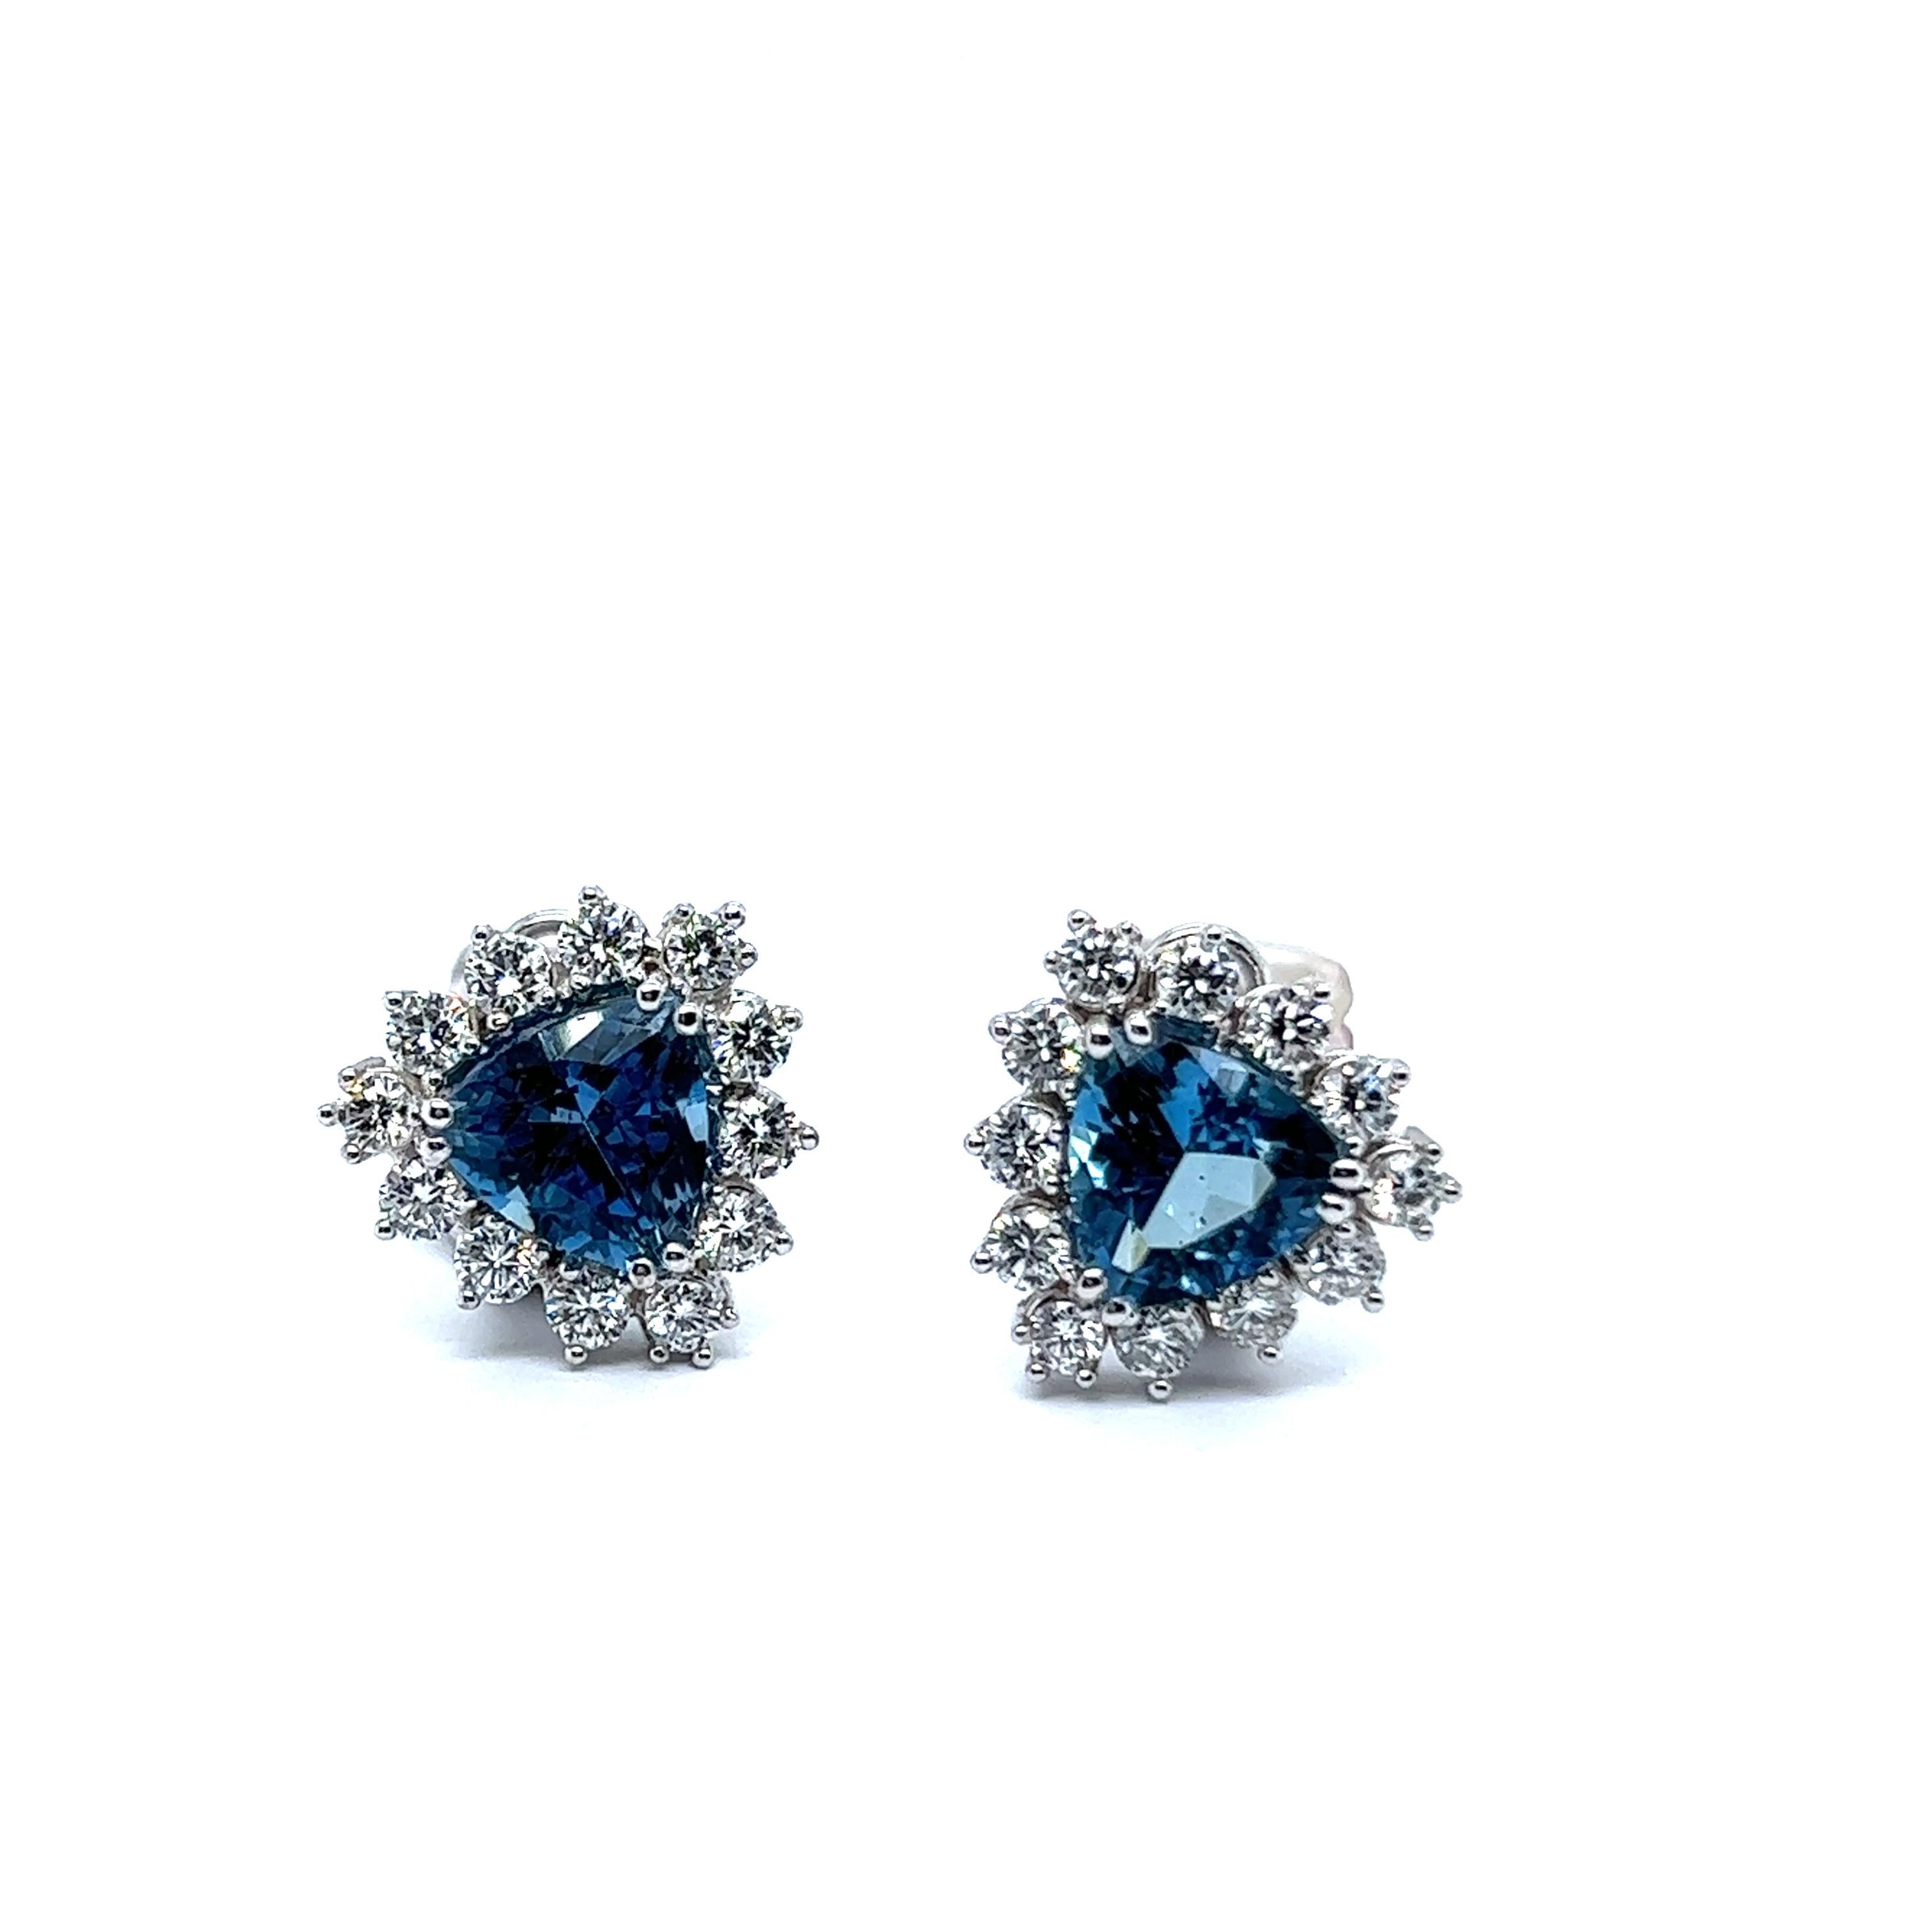 Delicate earrings with aquamarine and diamonds crated by Gübelin, Swiss Jewelry Home with a rich history dating back to 1854. Known for their exceptional craftsmanship and expertise in gemstones, Gübelin has been synonymous with fine jewelry,